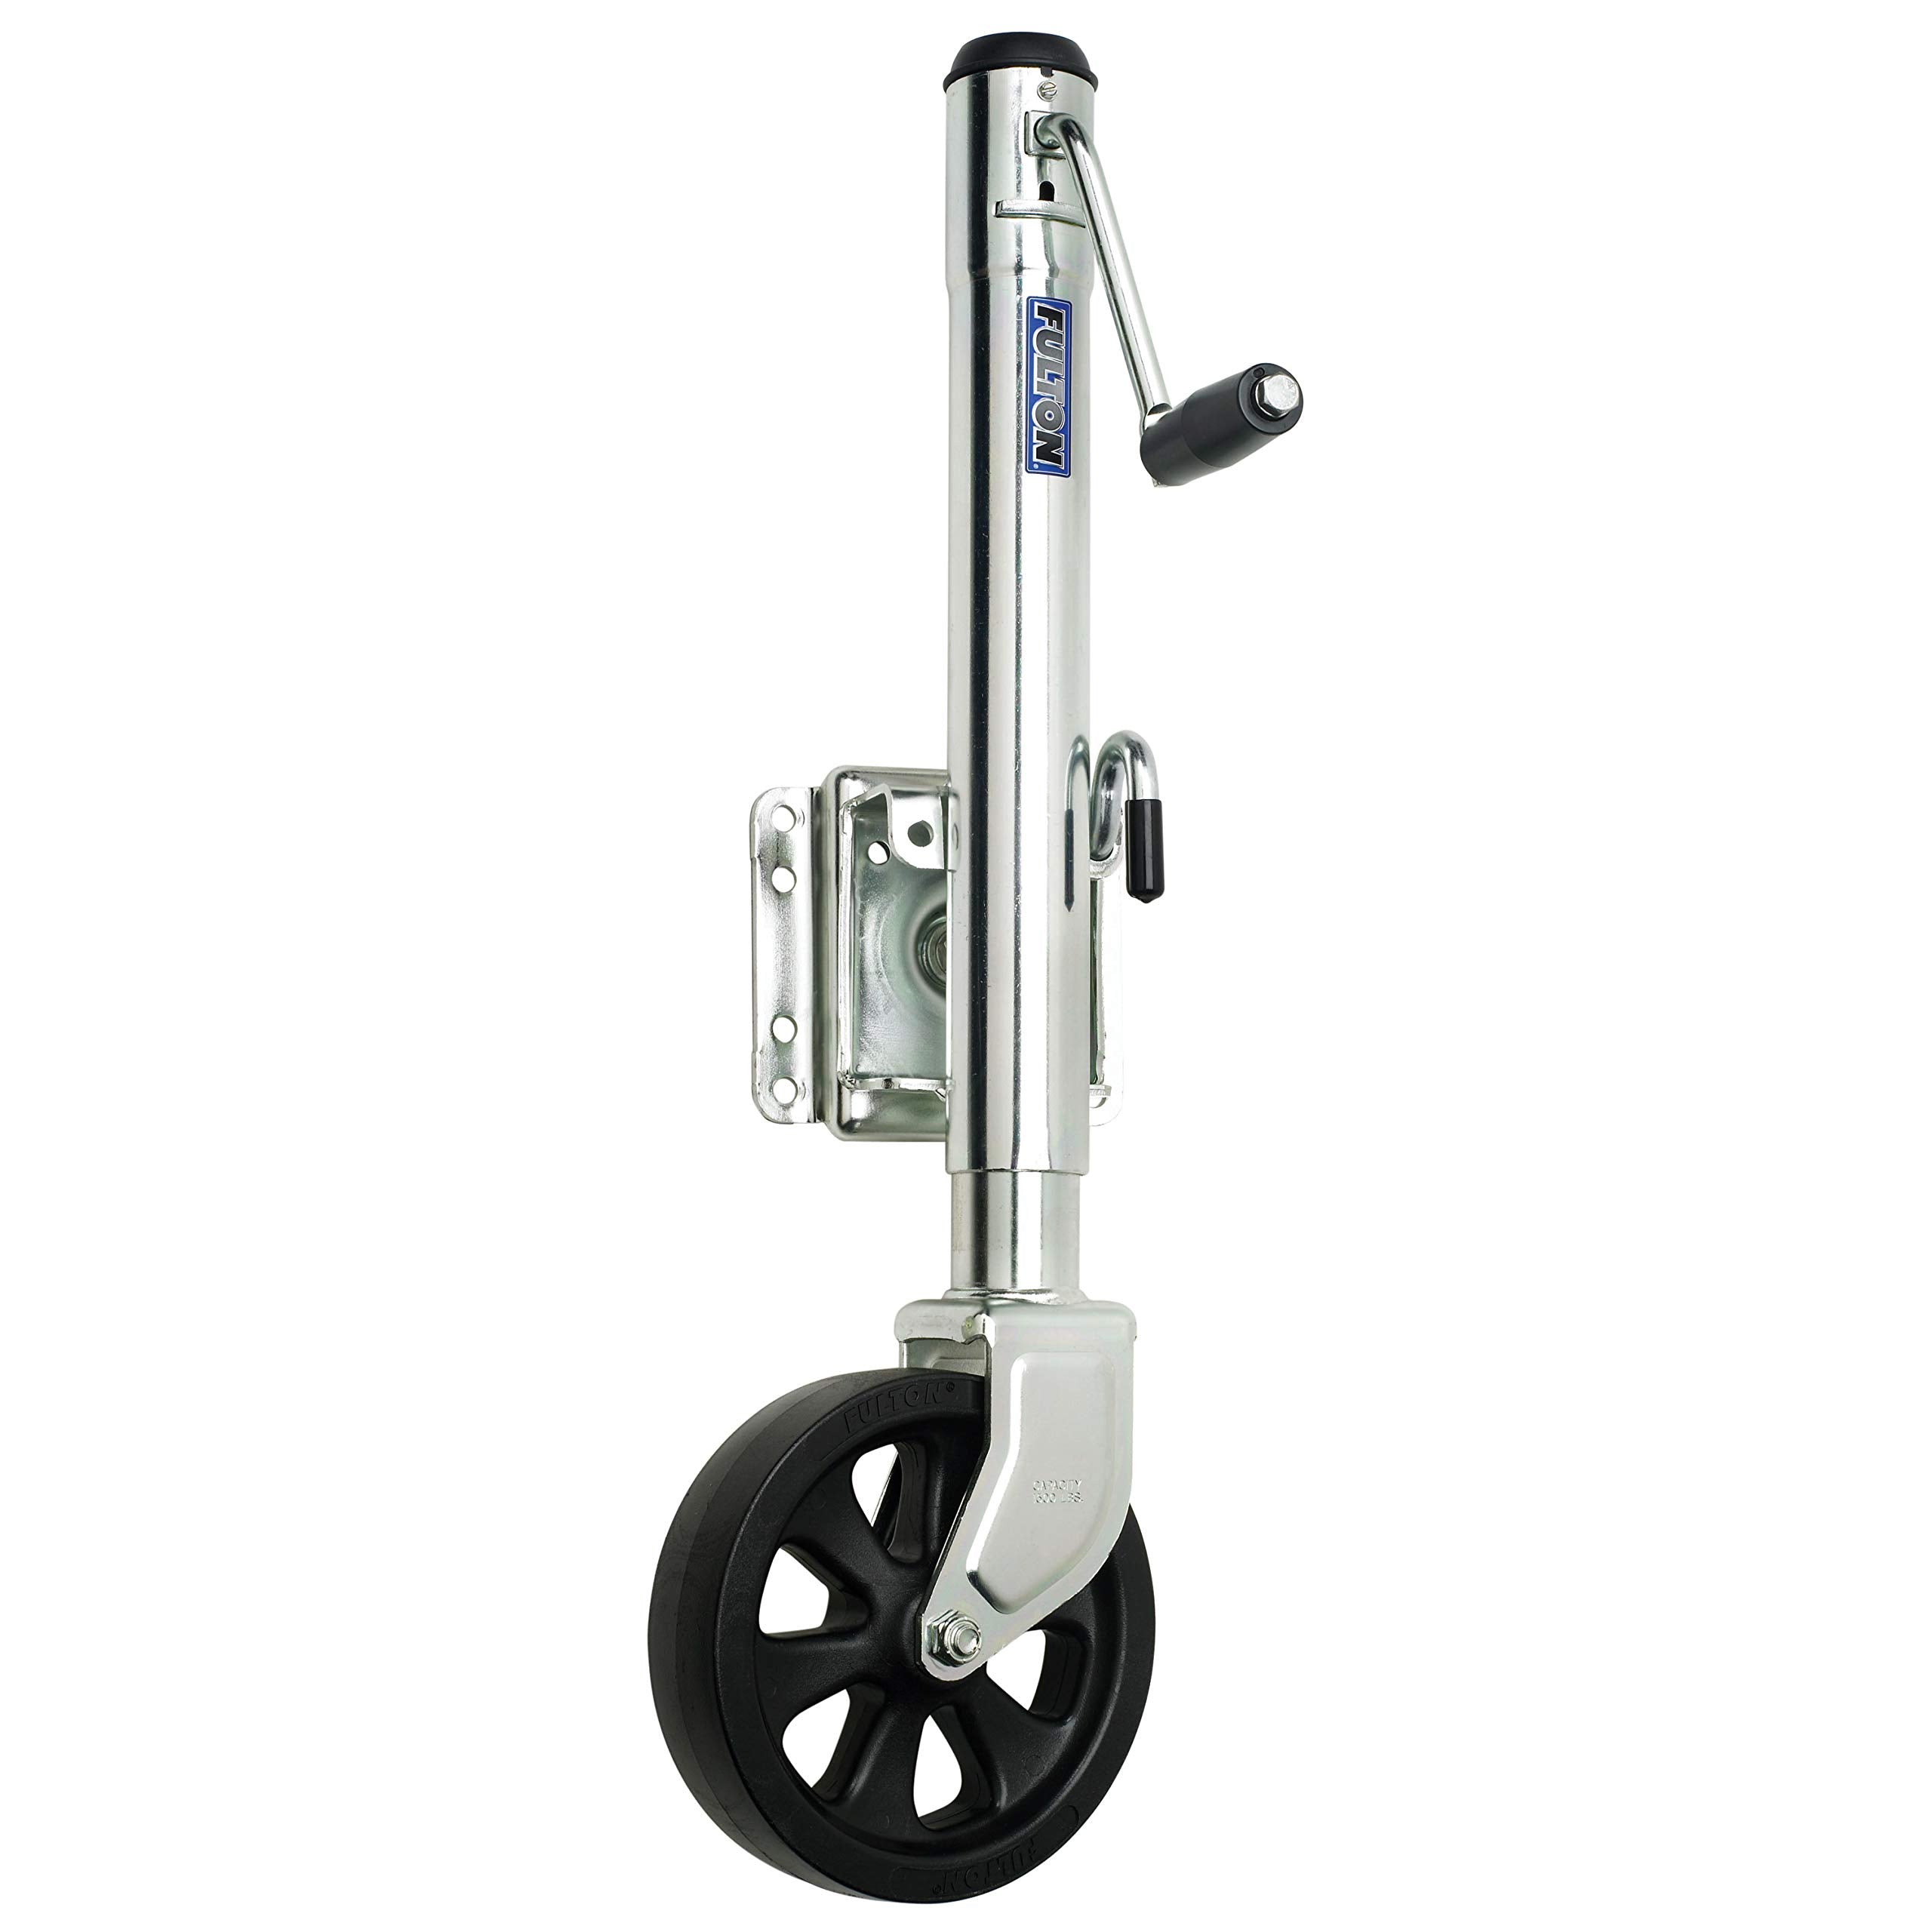 Fulton XP15 0101 Steel Swing-Away Bolt-On Jack with 10" Travel and 8" Poly Wheel - 1500 lb. Weight Capacity